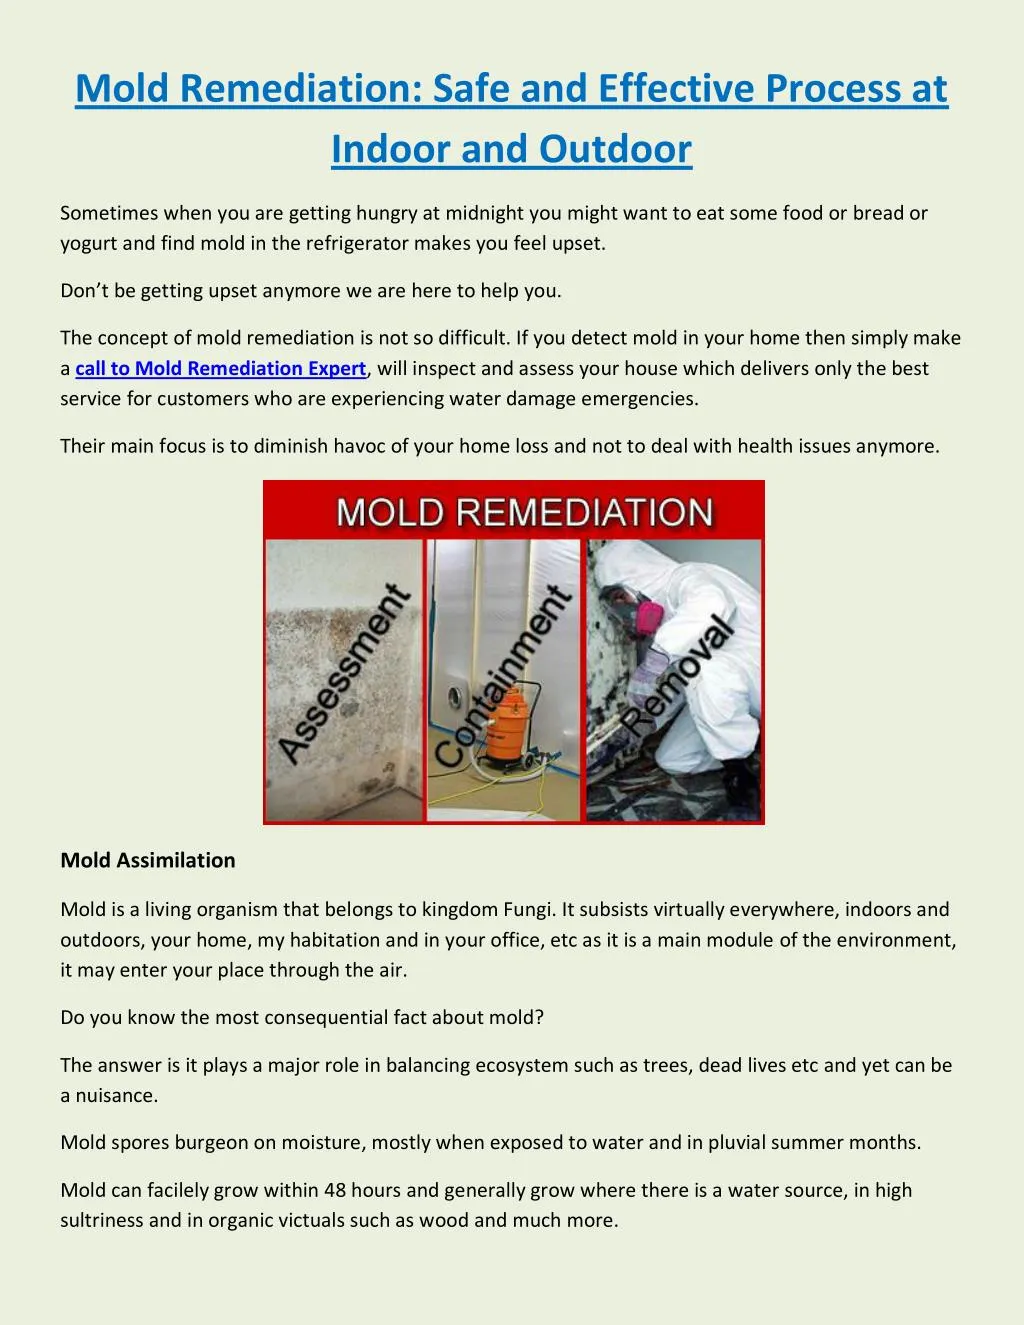 mold remediation safe and effective process